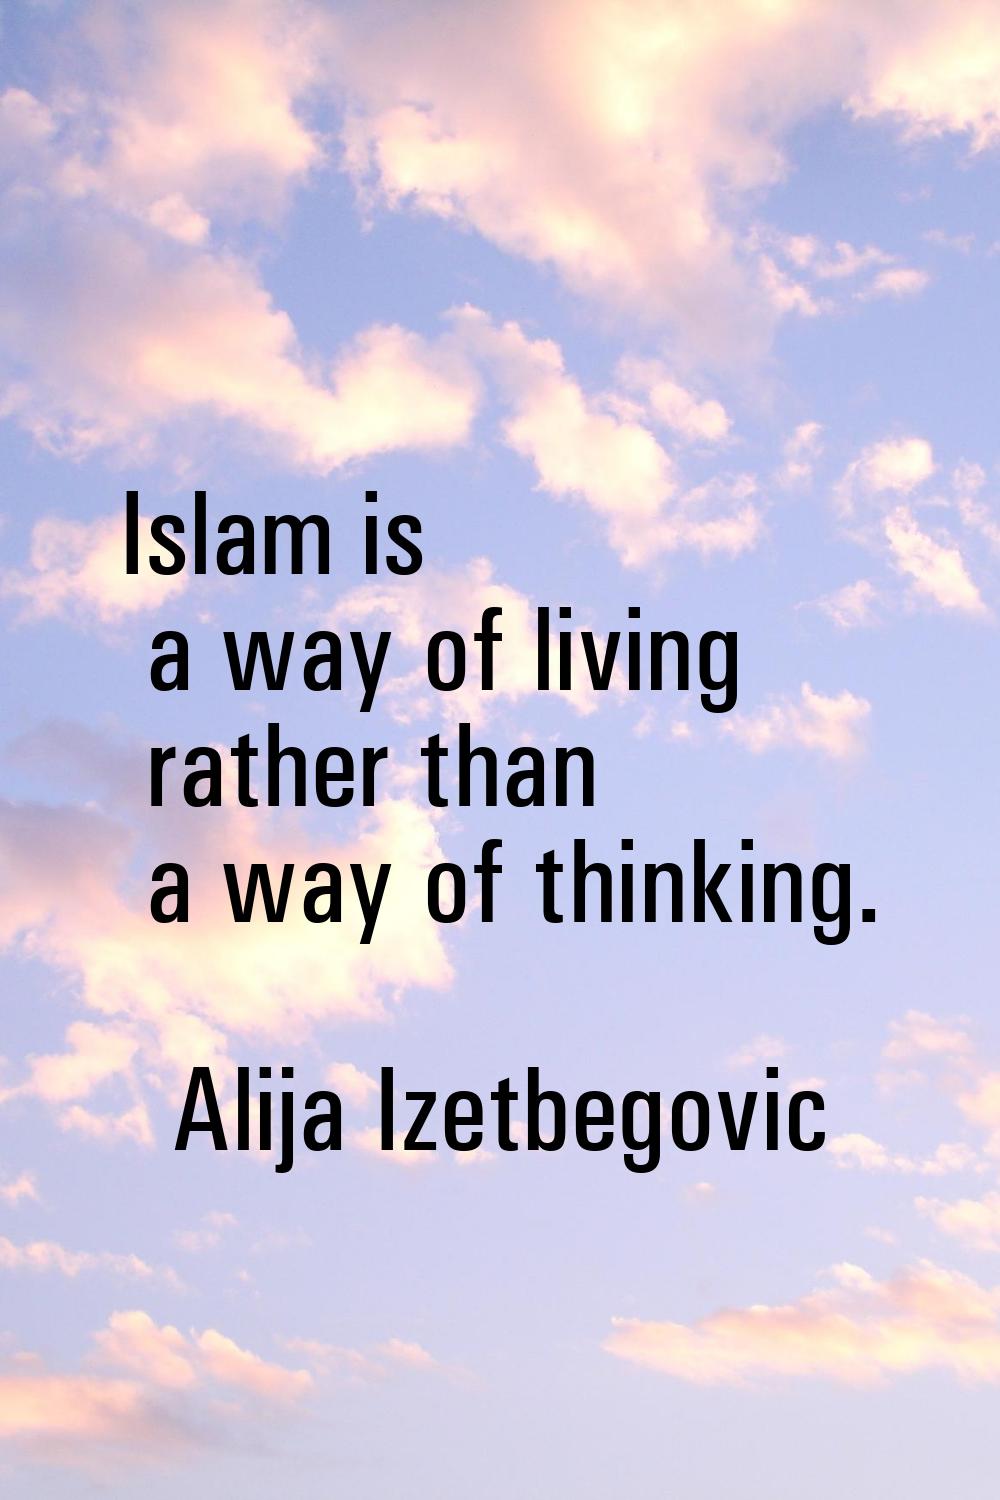 Islam is a way of living rather than a way of thinking.